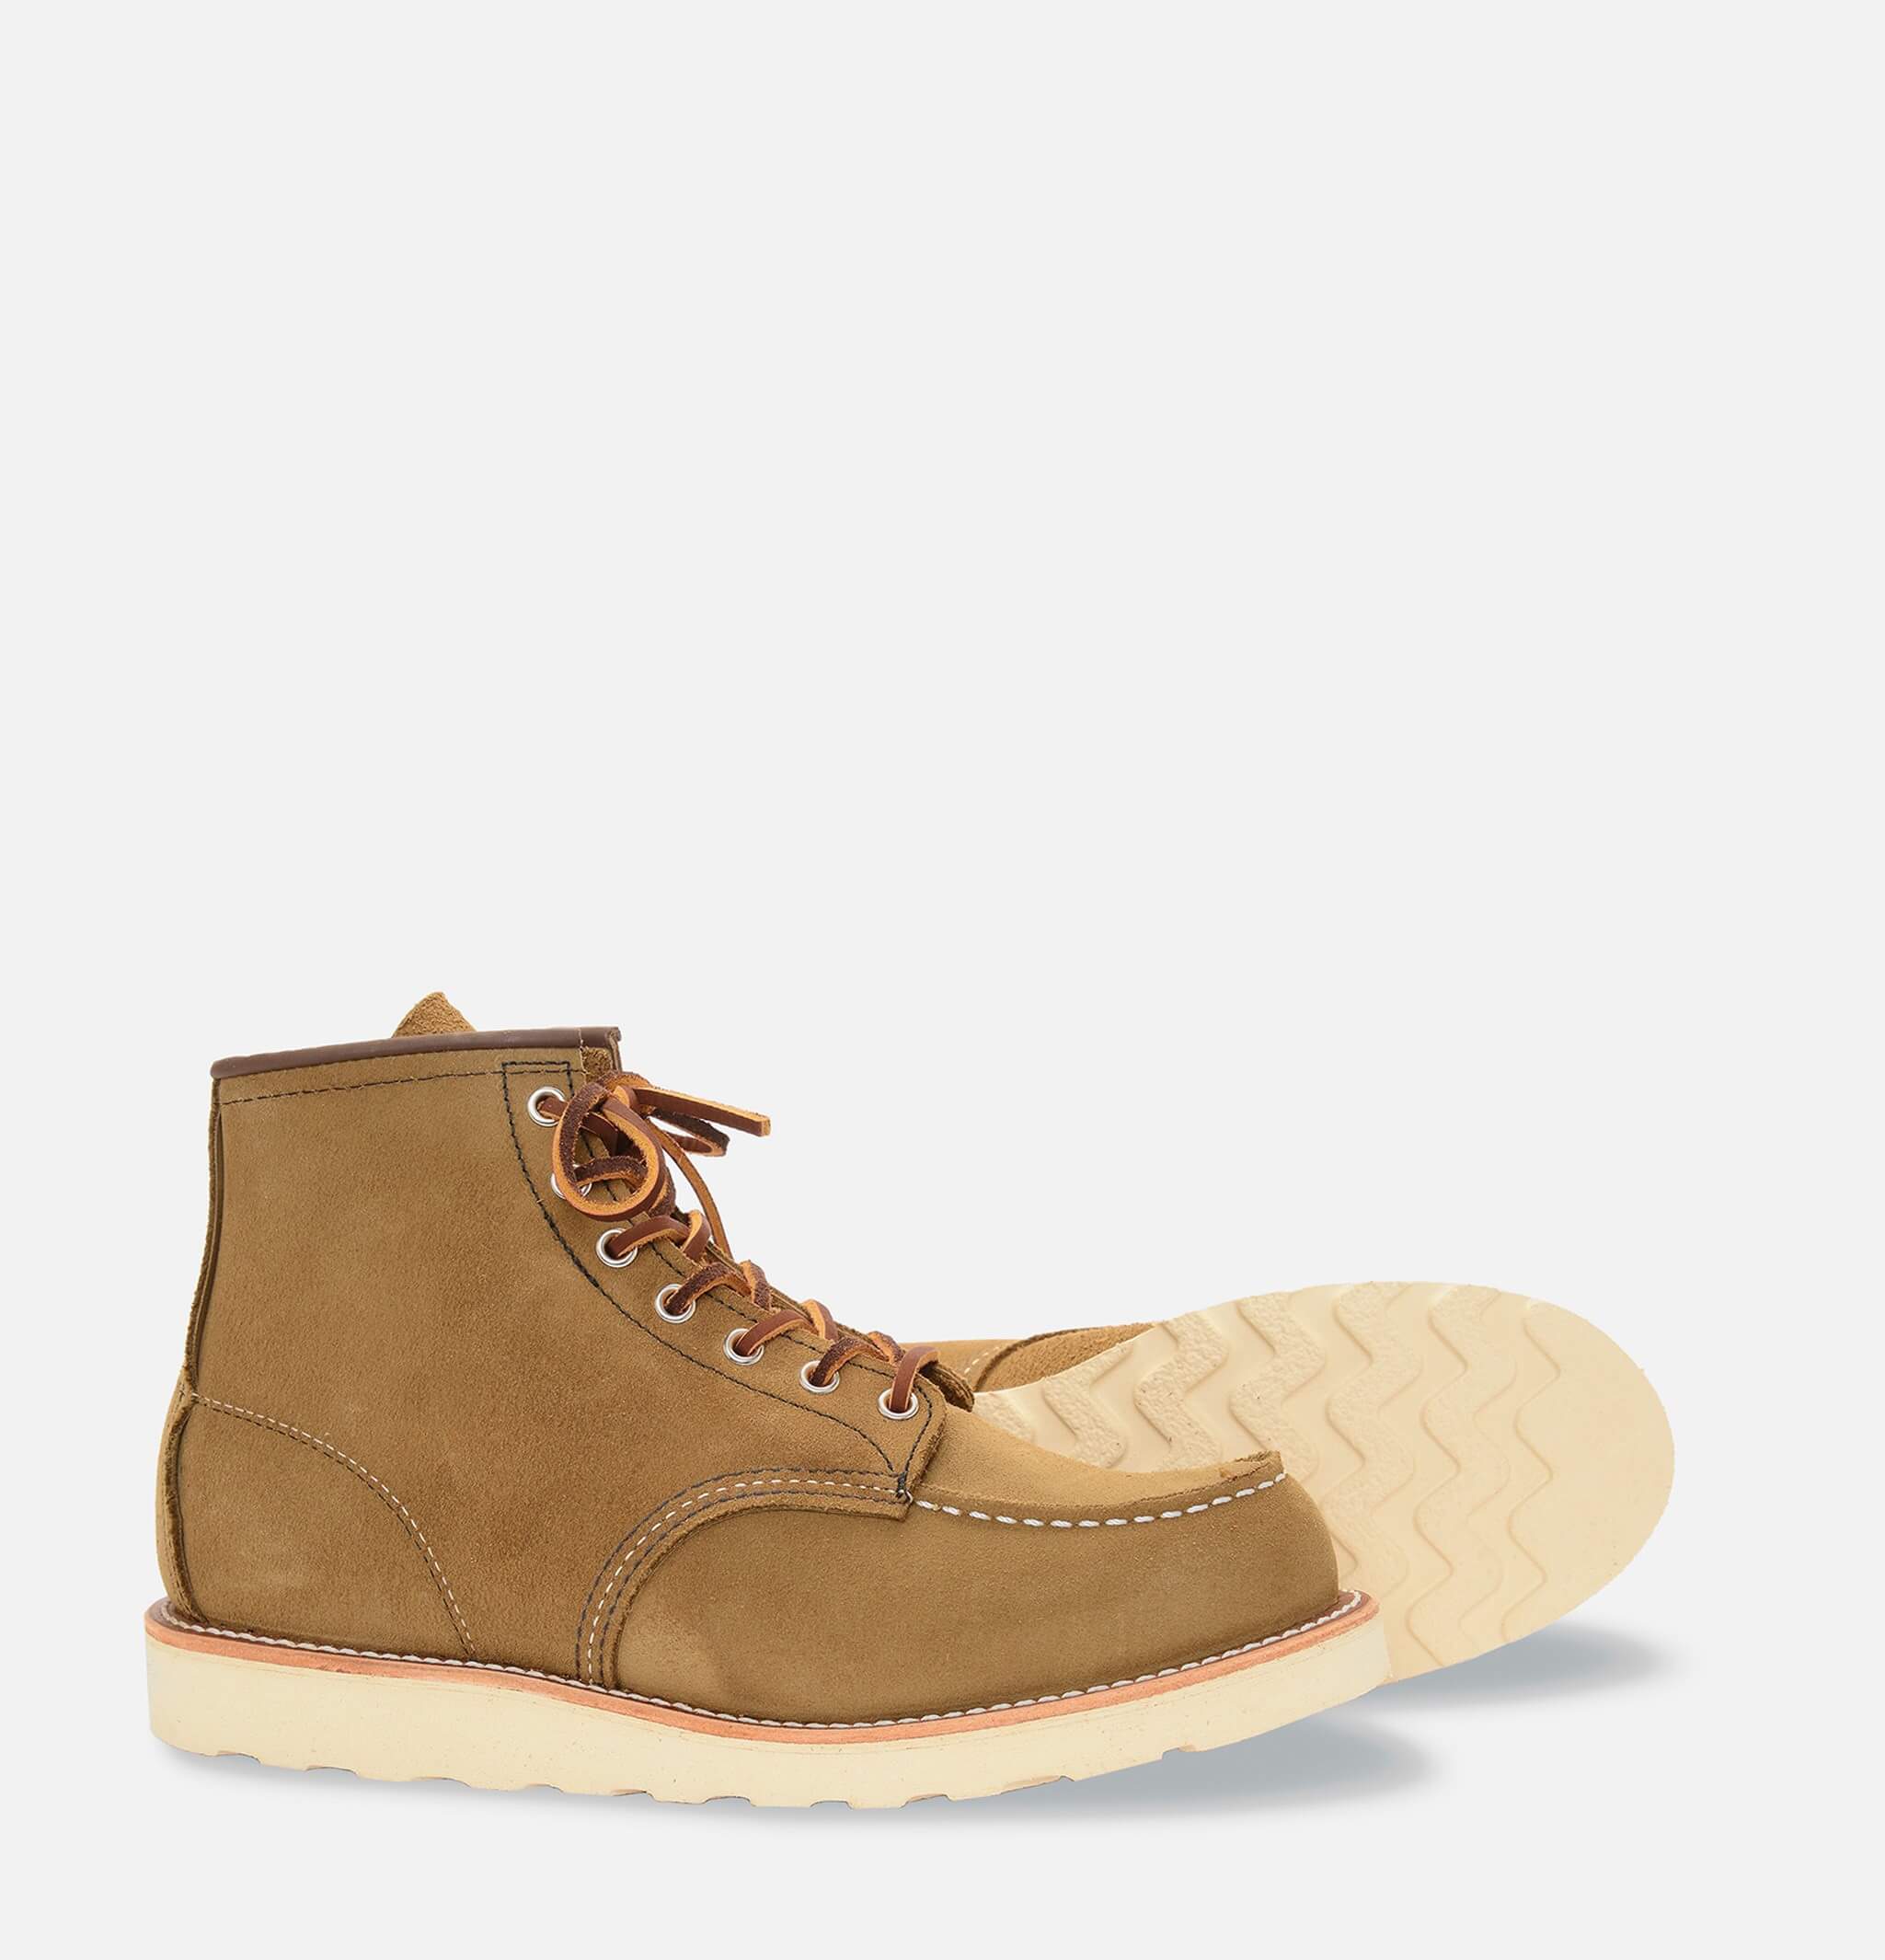 Red Wing Shoes | Redwing Moc Toe 8881 | Royalcheese Paris - Royalcheese